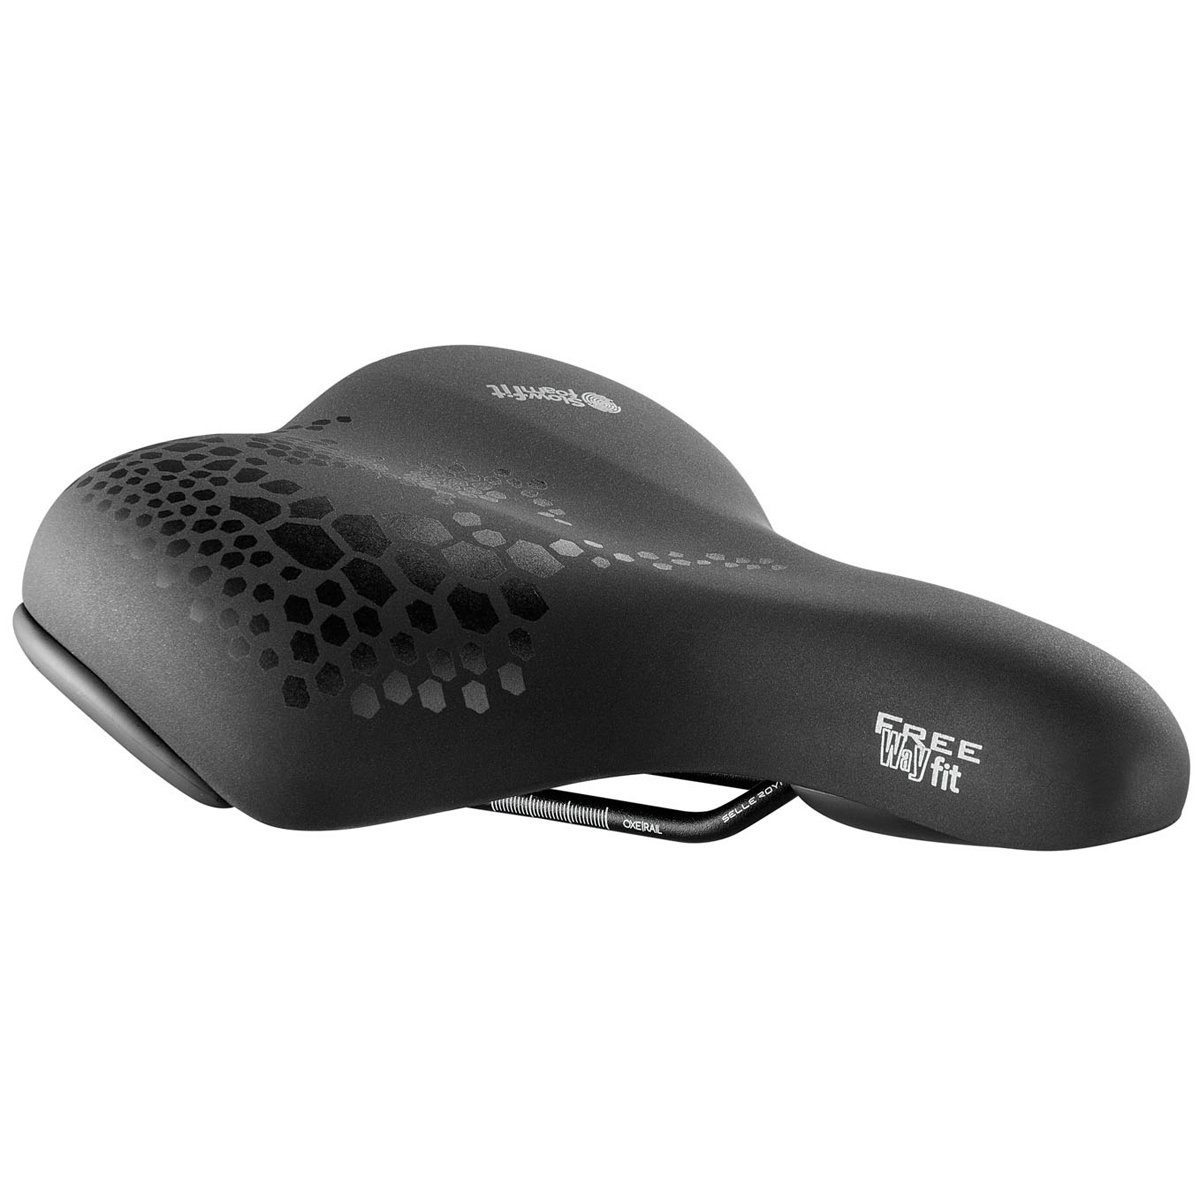 Selle Royal Freeway Fit Sadel - Relaxed